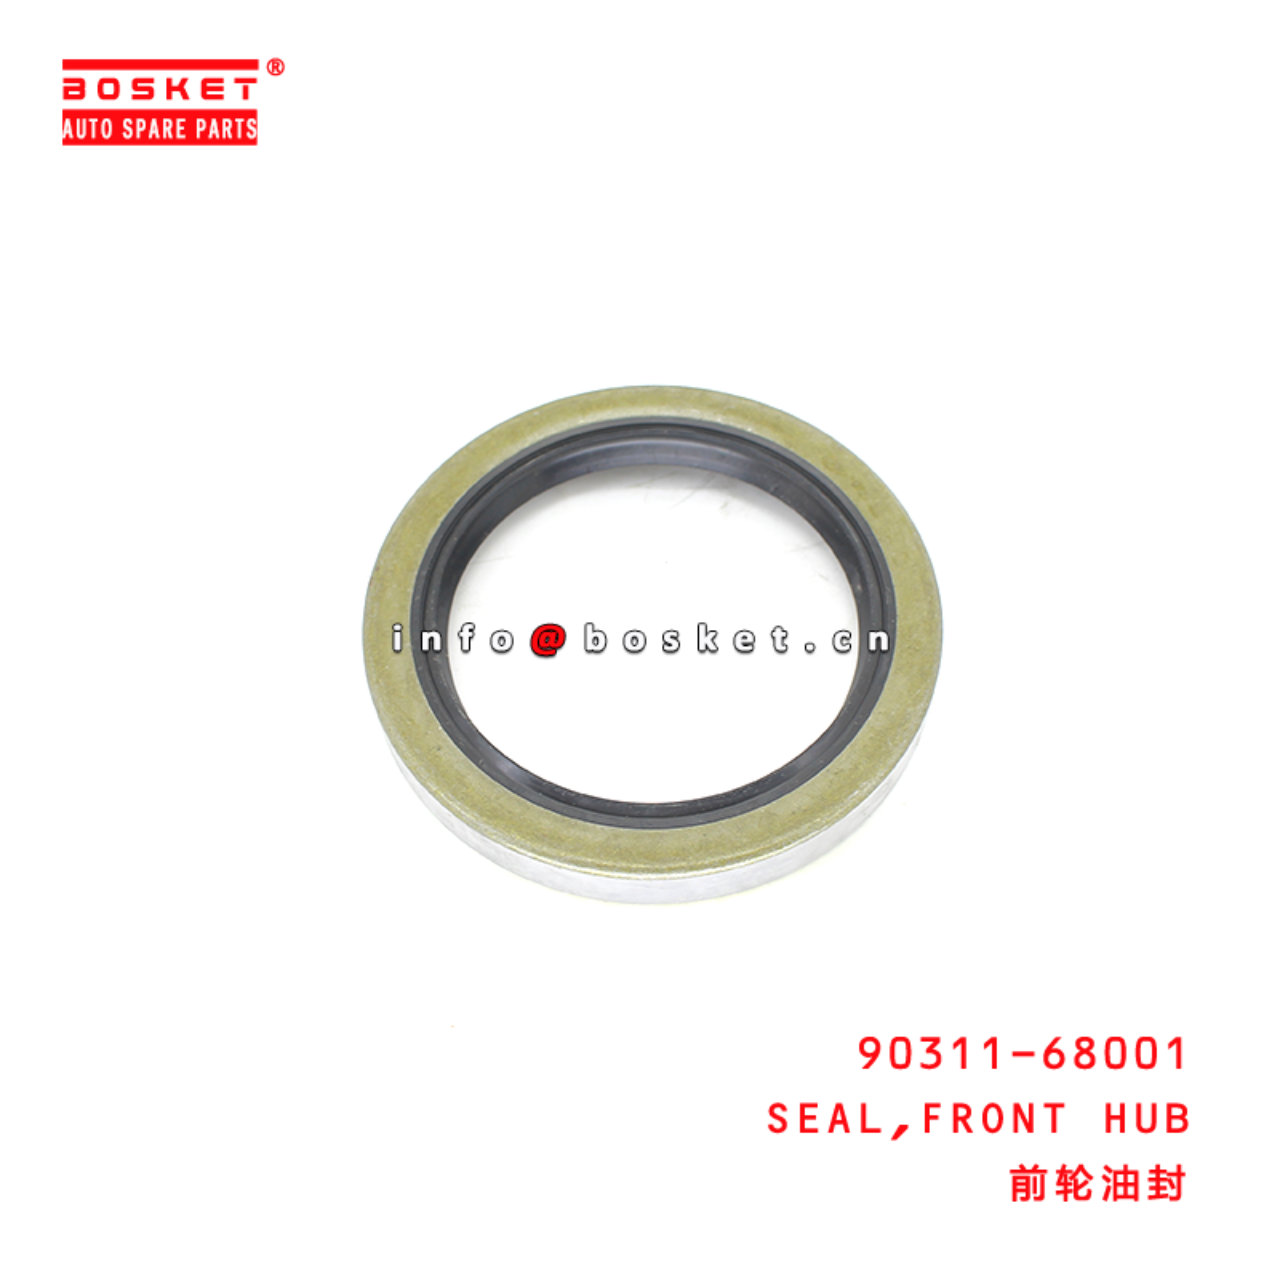 90311-68001 Front Hub Seal Suitable for ISUZU TOYOTA